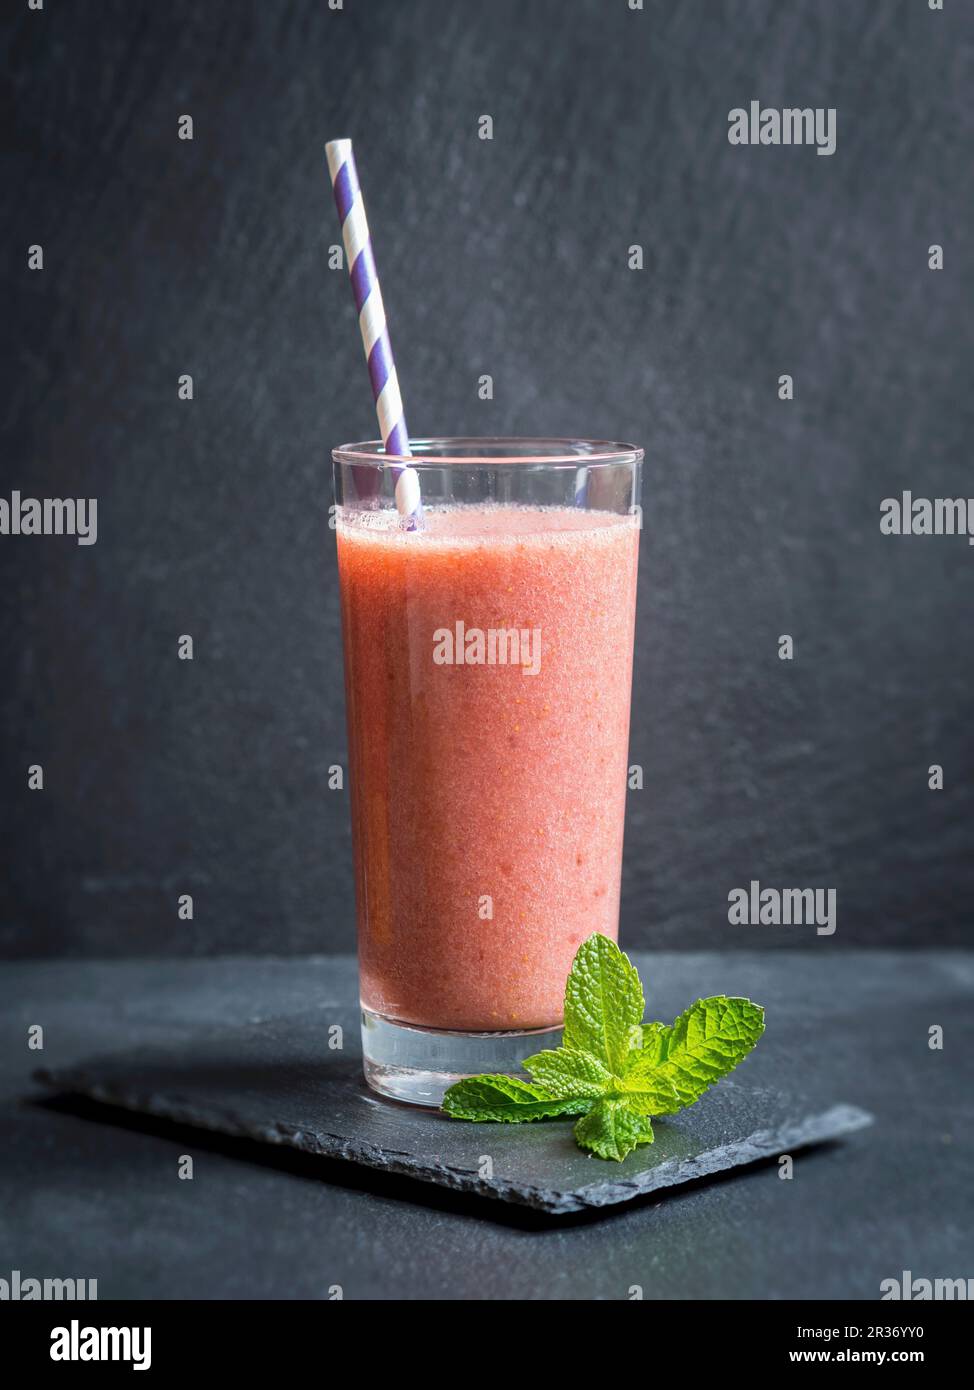 Dairy-free vegan red fruit smoothie in a glass with a straw Stock Photo